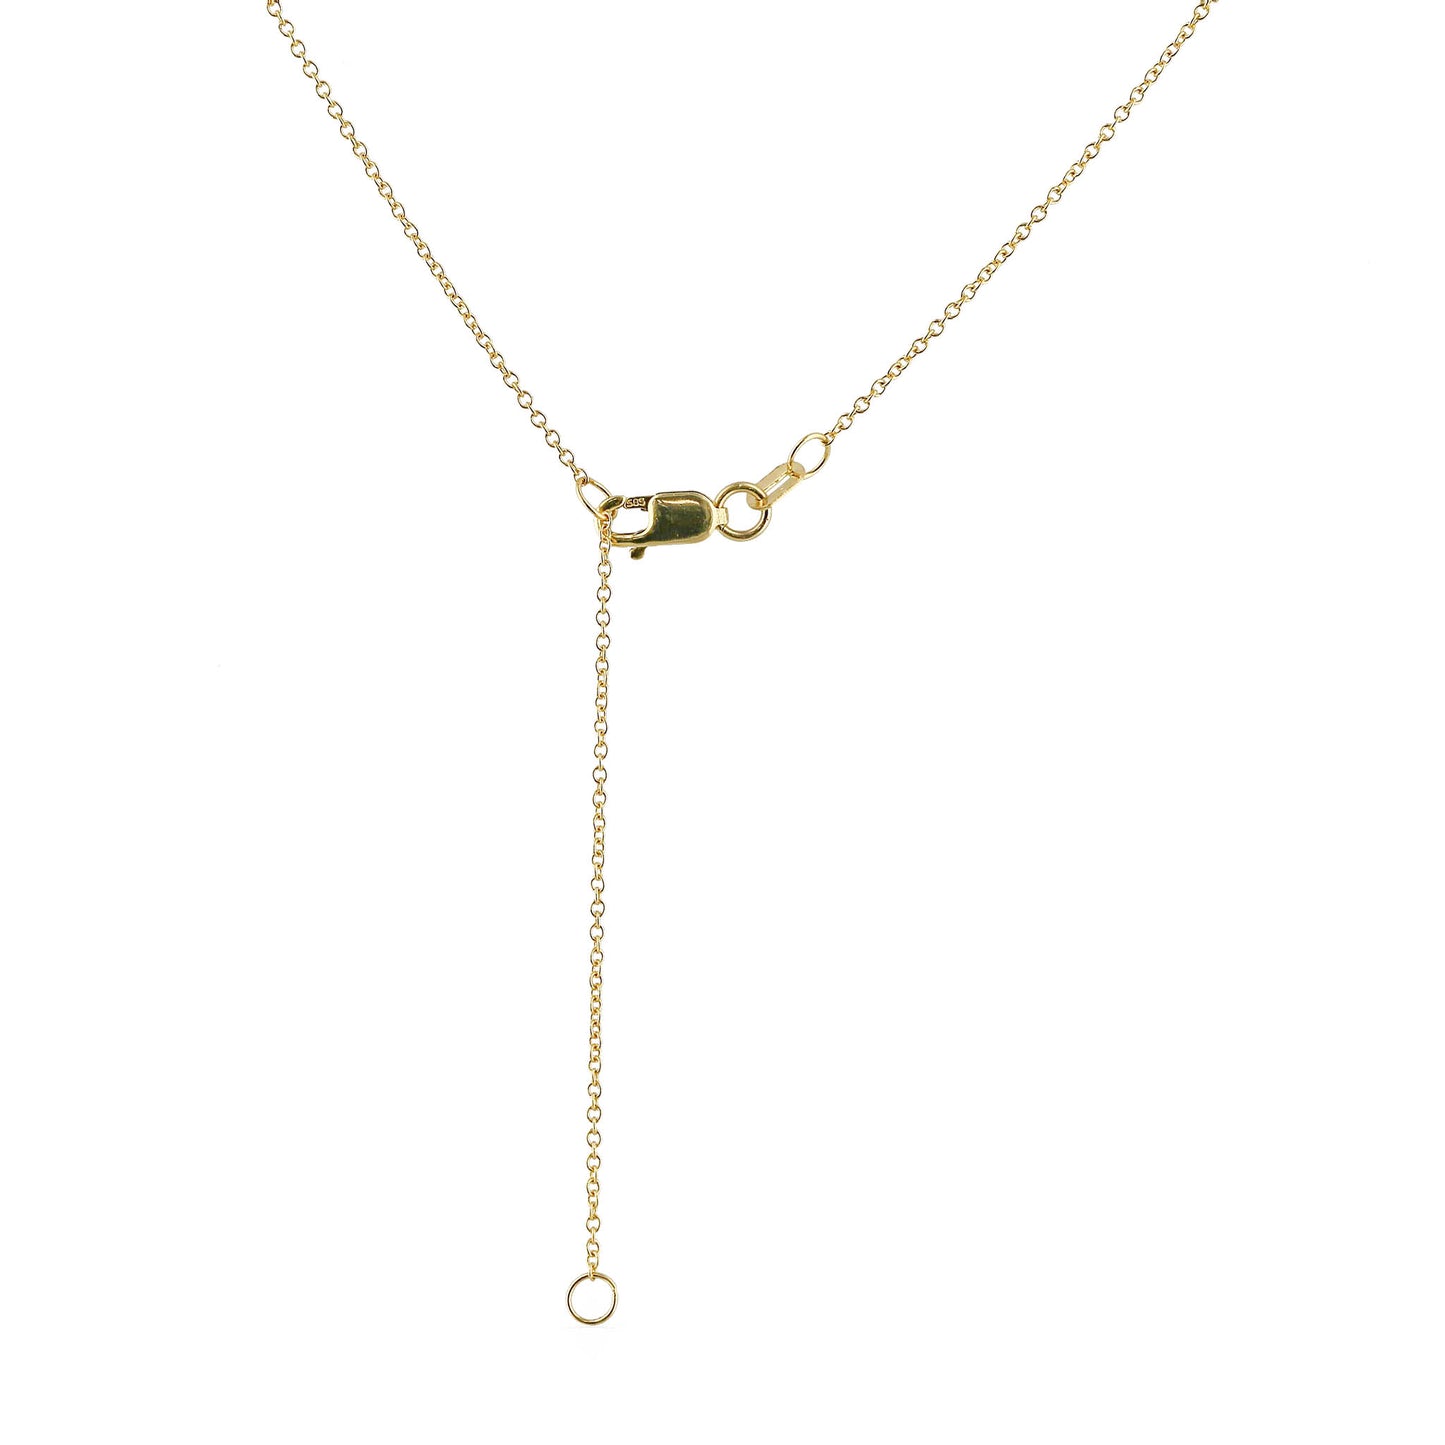 771394 - 14K Yellow Gold - 16" Adjustable Keiki Cable Chain, 0.8mm